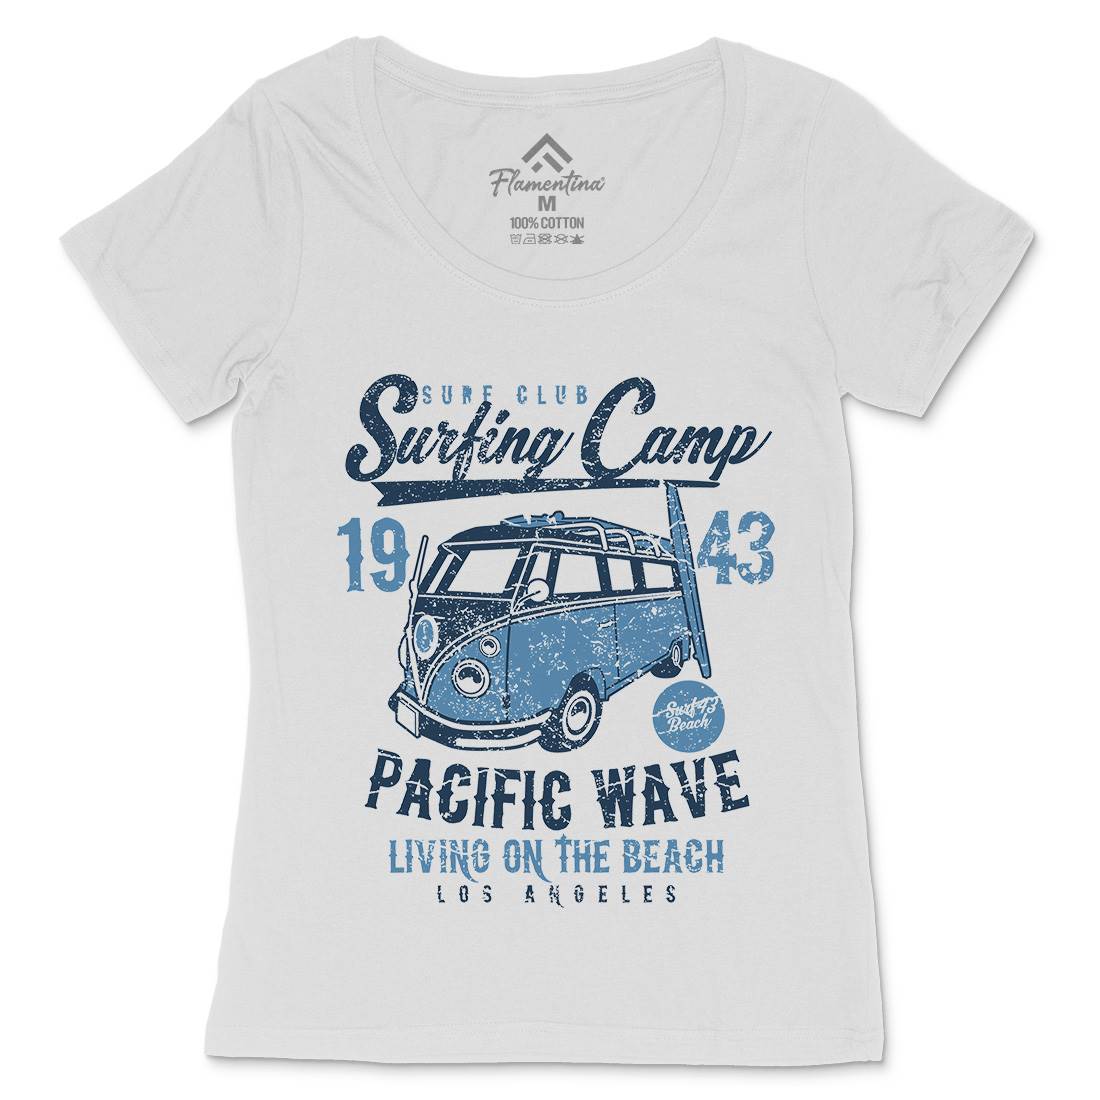 Surfing Camp Womens Scoop Neck T-Shirt Surf A170